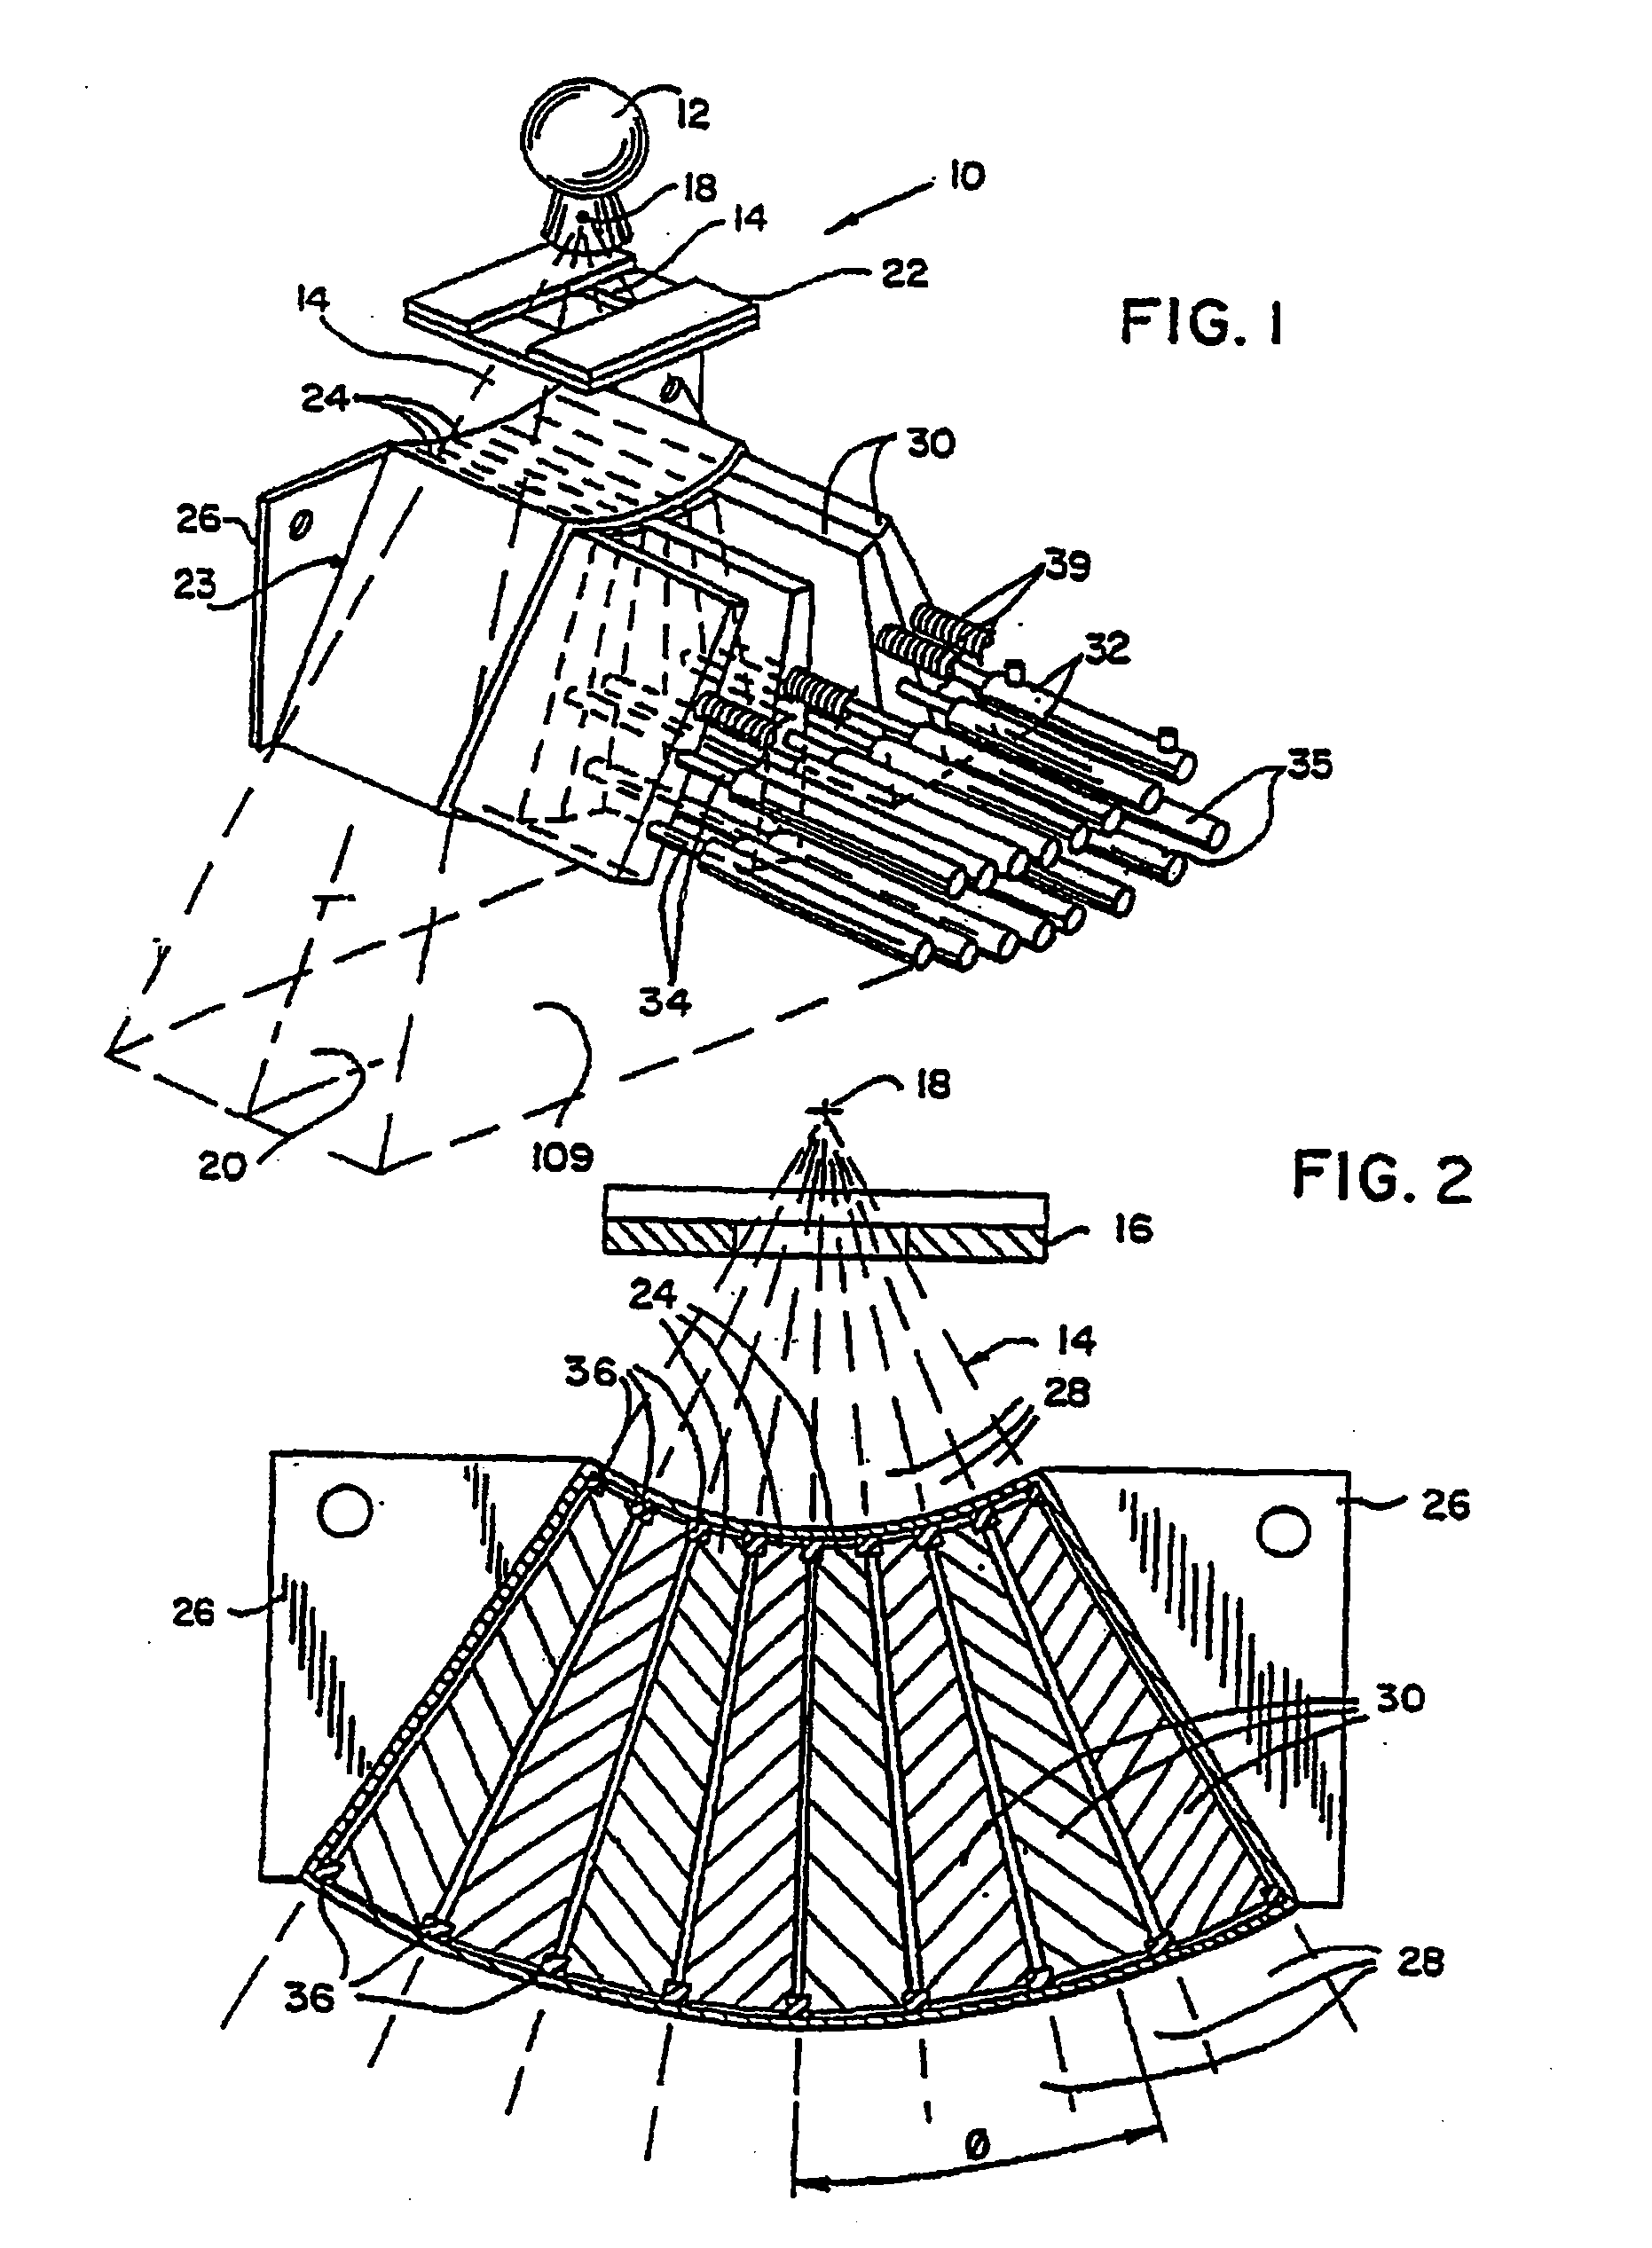 System and method for optimization of a radiation therapy plan in the presence of motion